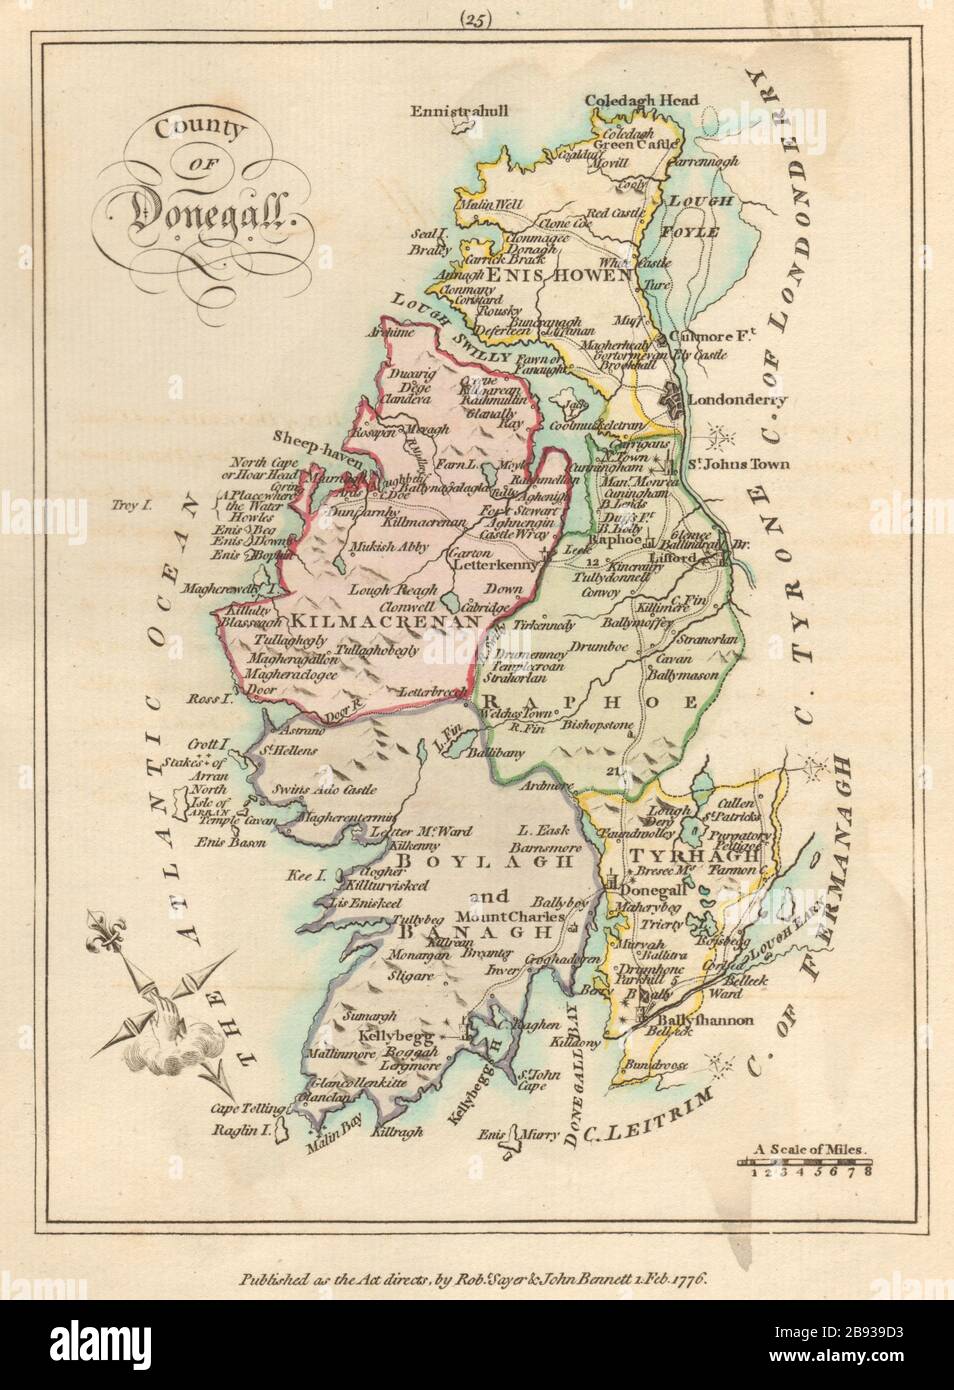 County of Donegall, Ulster. Antique copperplate map by Scalé / Sayer 1776 Stock Photo